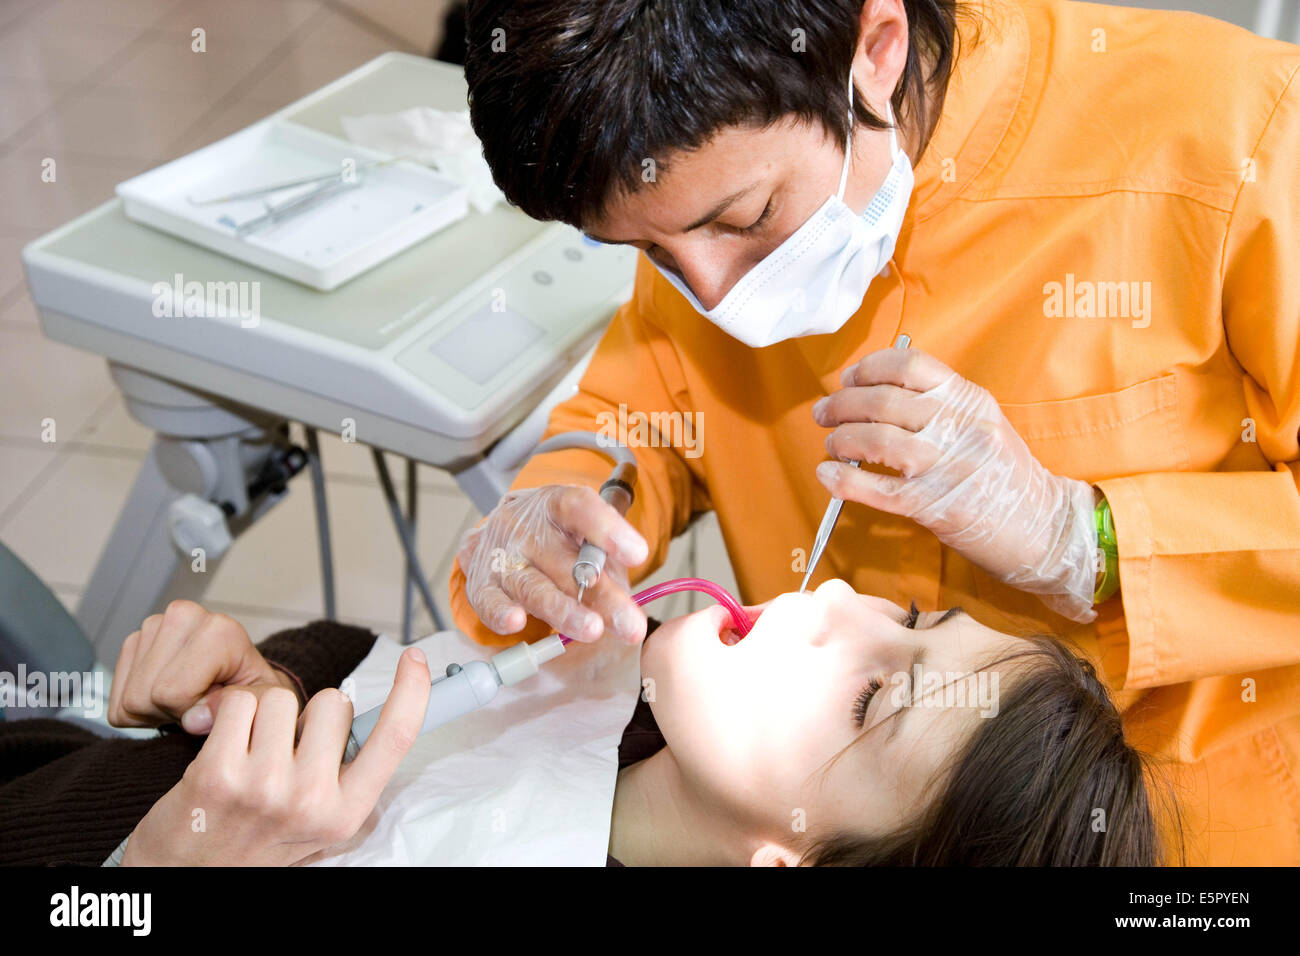 13 year old girl at the dentist. Stock Photo